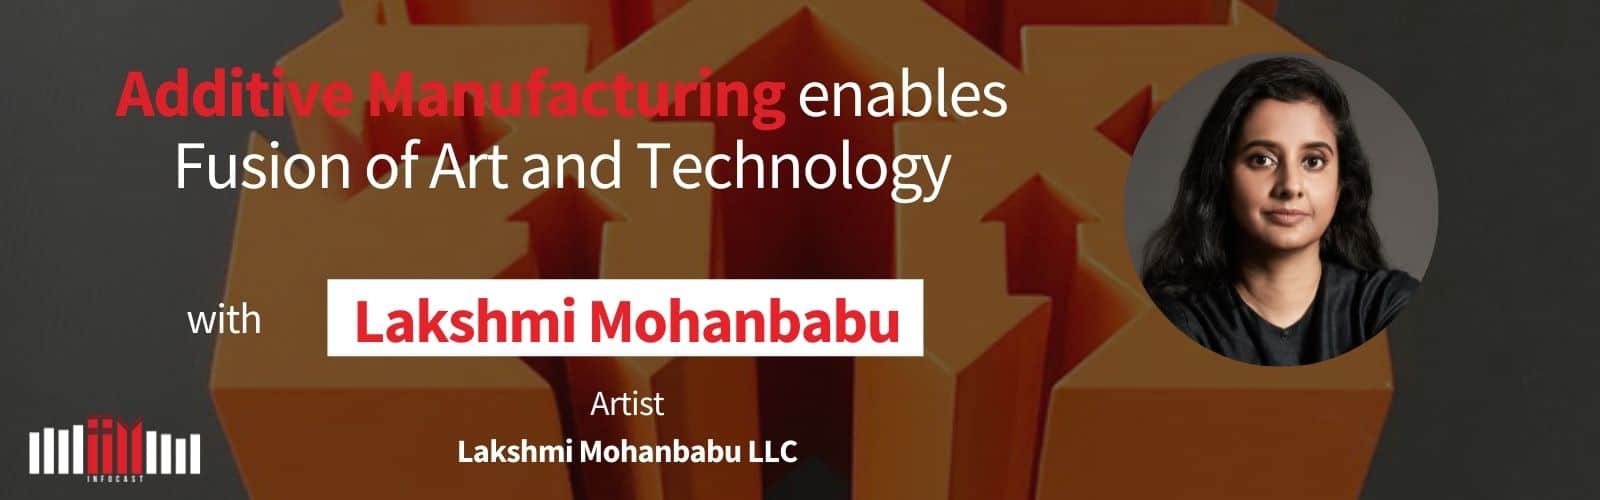 Additive Manufacturing enables Fusion of Art and Technology with Lakshmi Mohanbabu